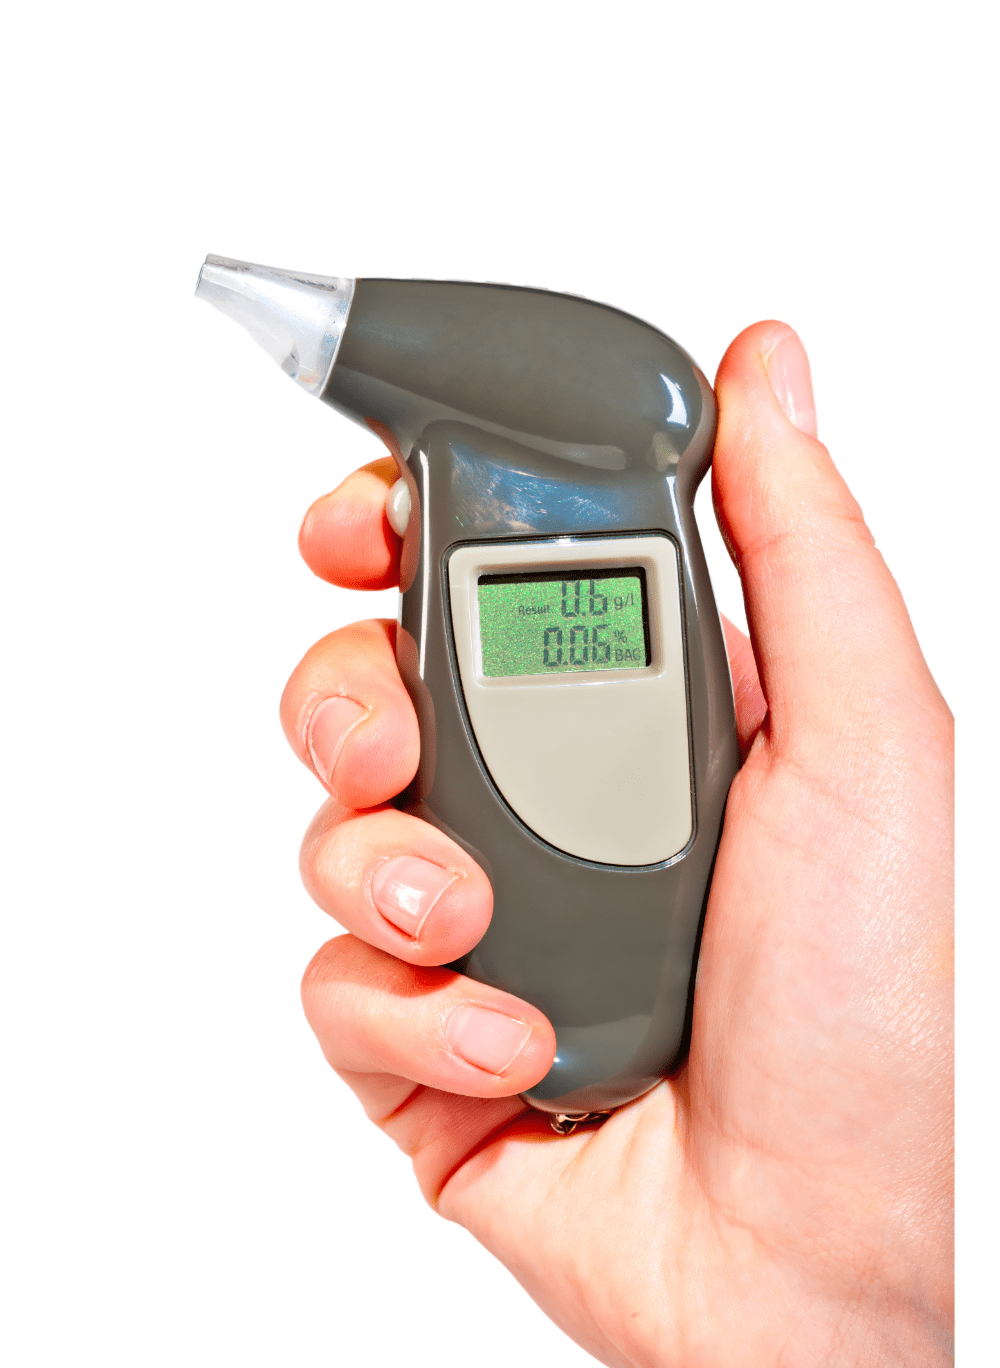 Breathalyzer | Do You Have to Consent to a Breathalyzer